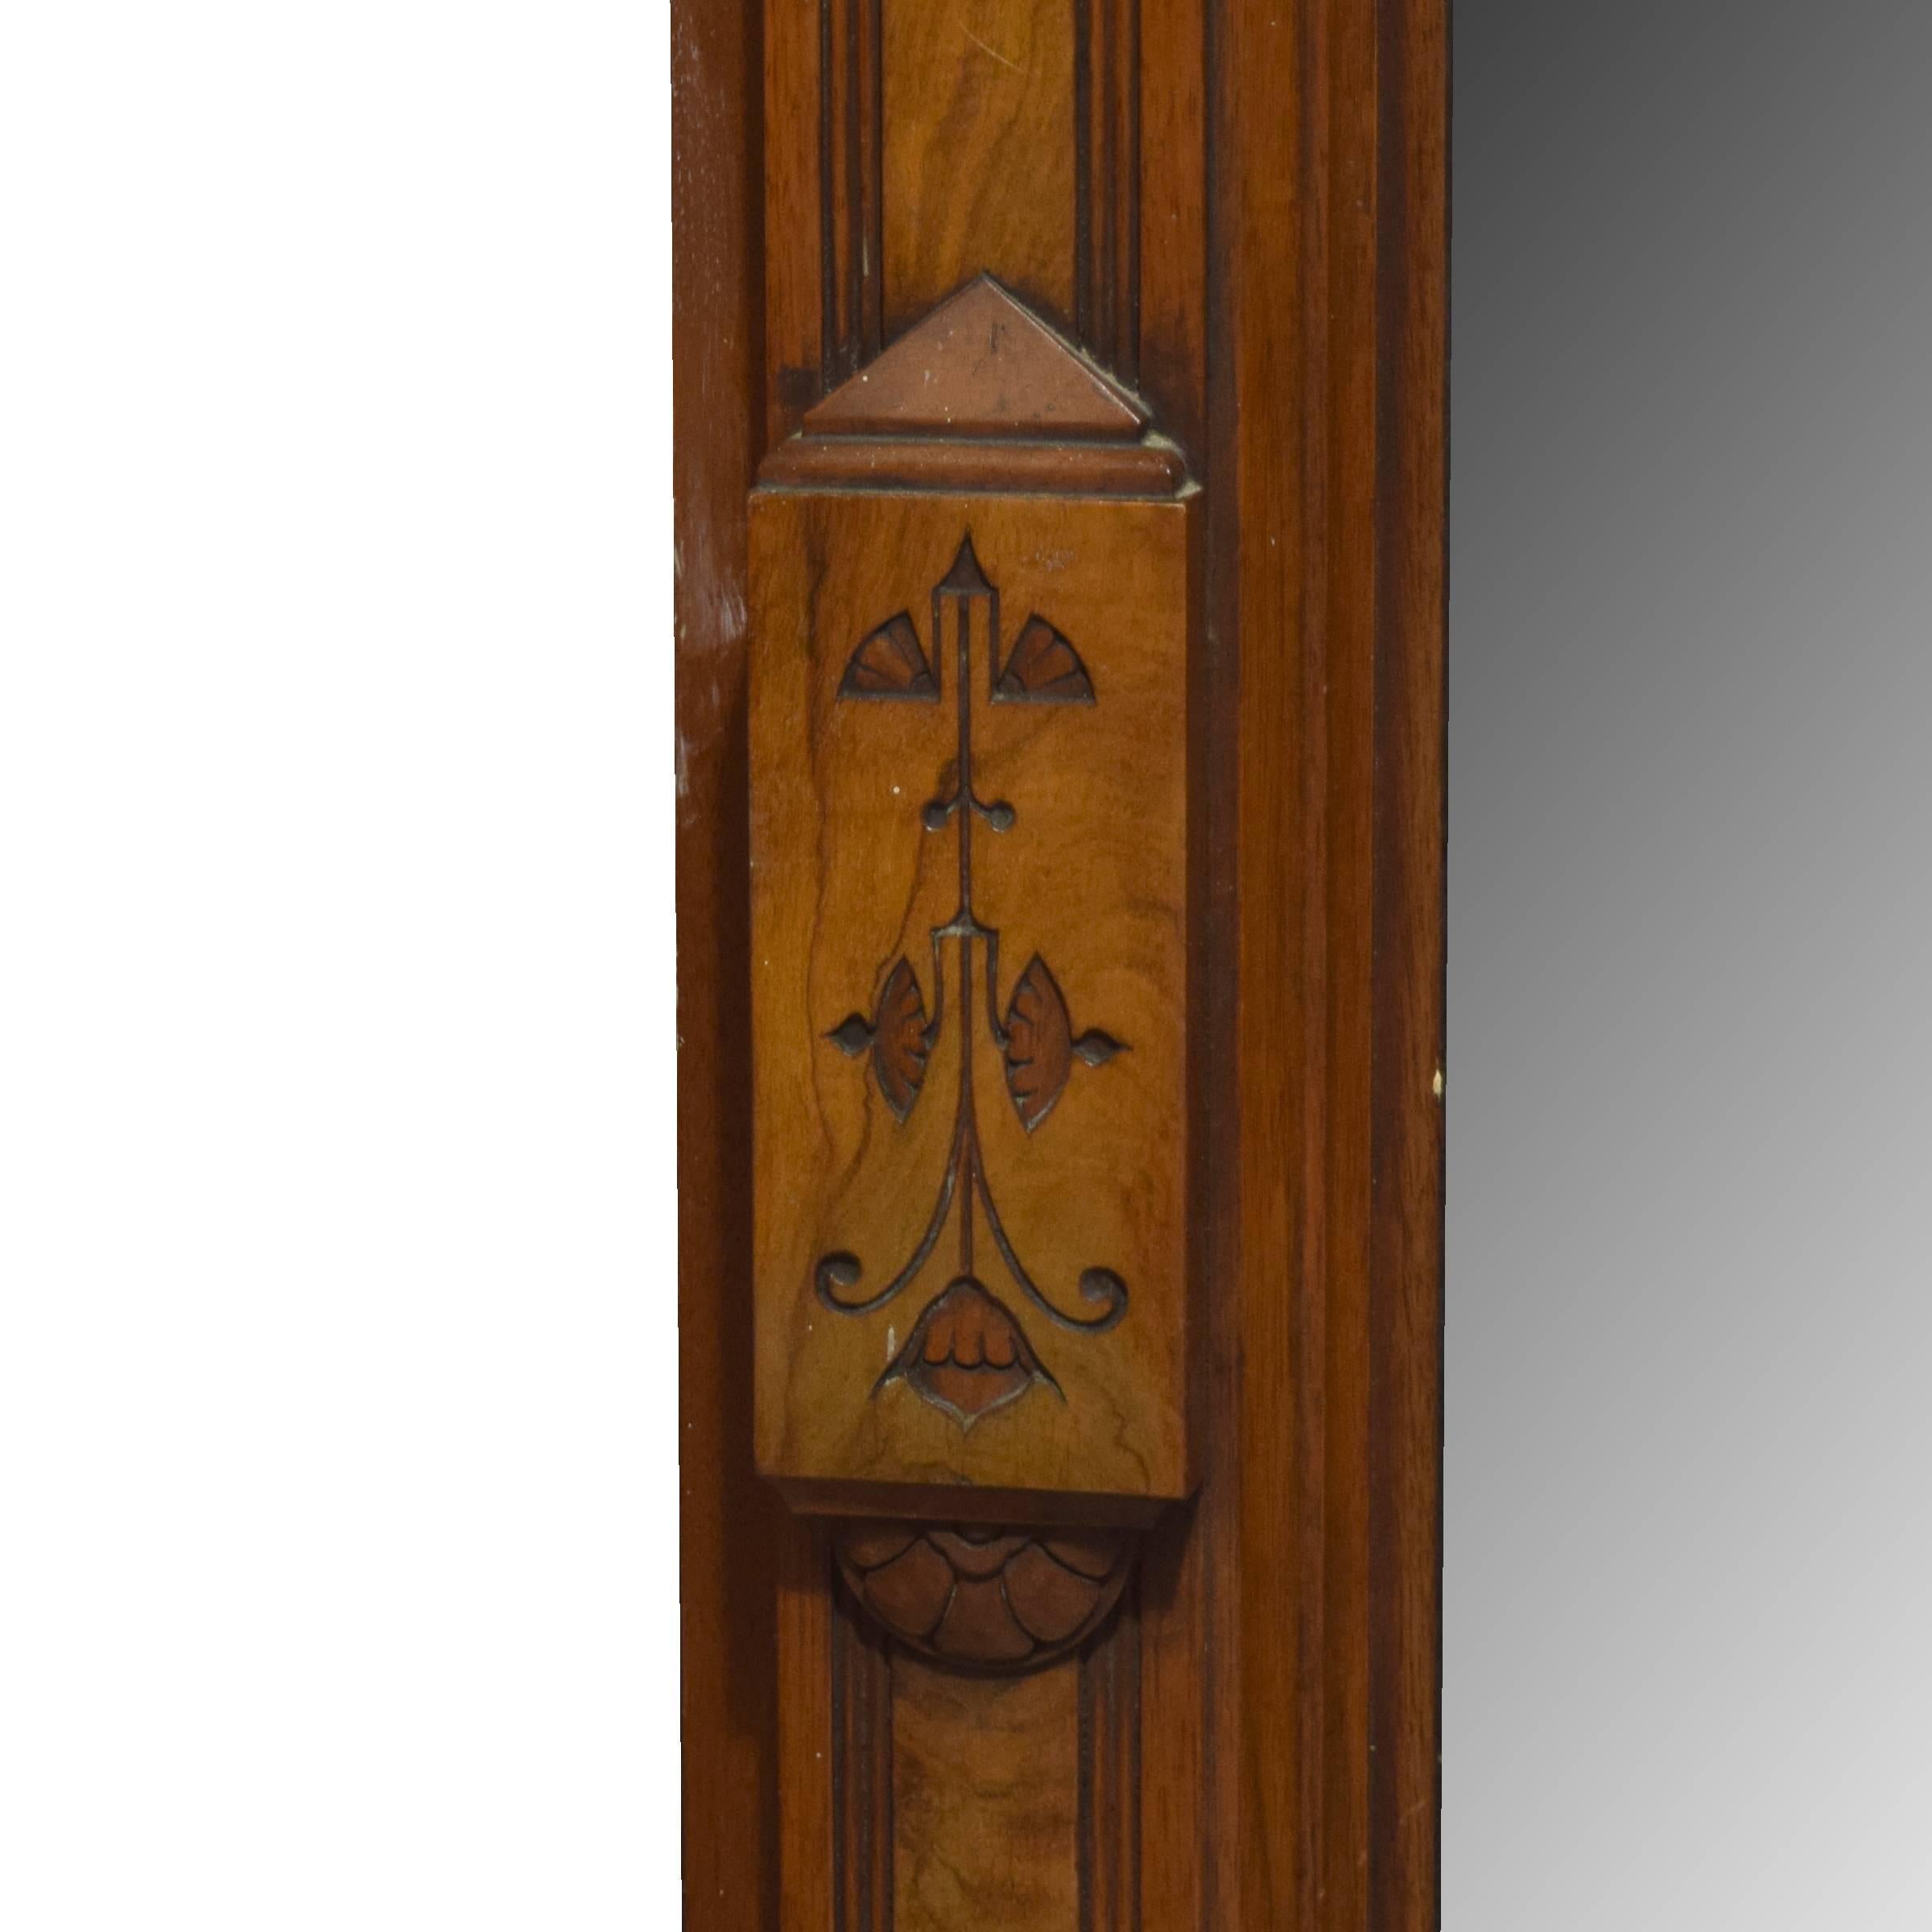 A fantastic American walnut pier mirror with great details and carvings along the sides and top.